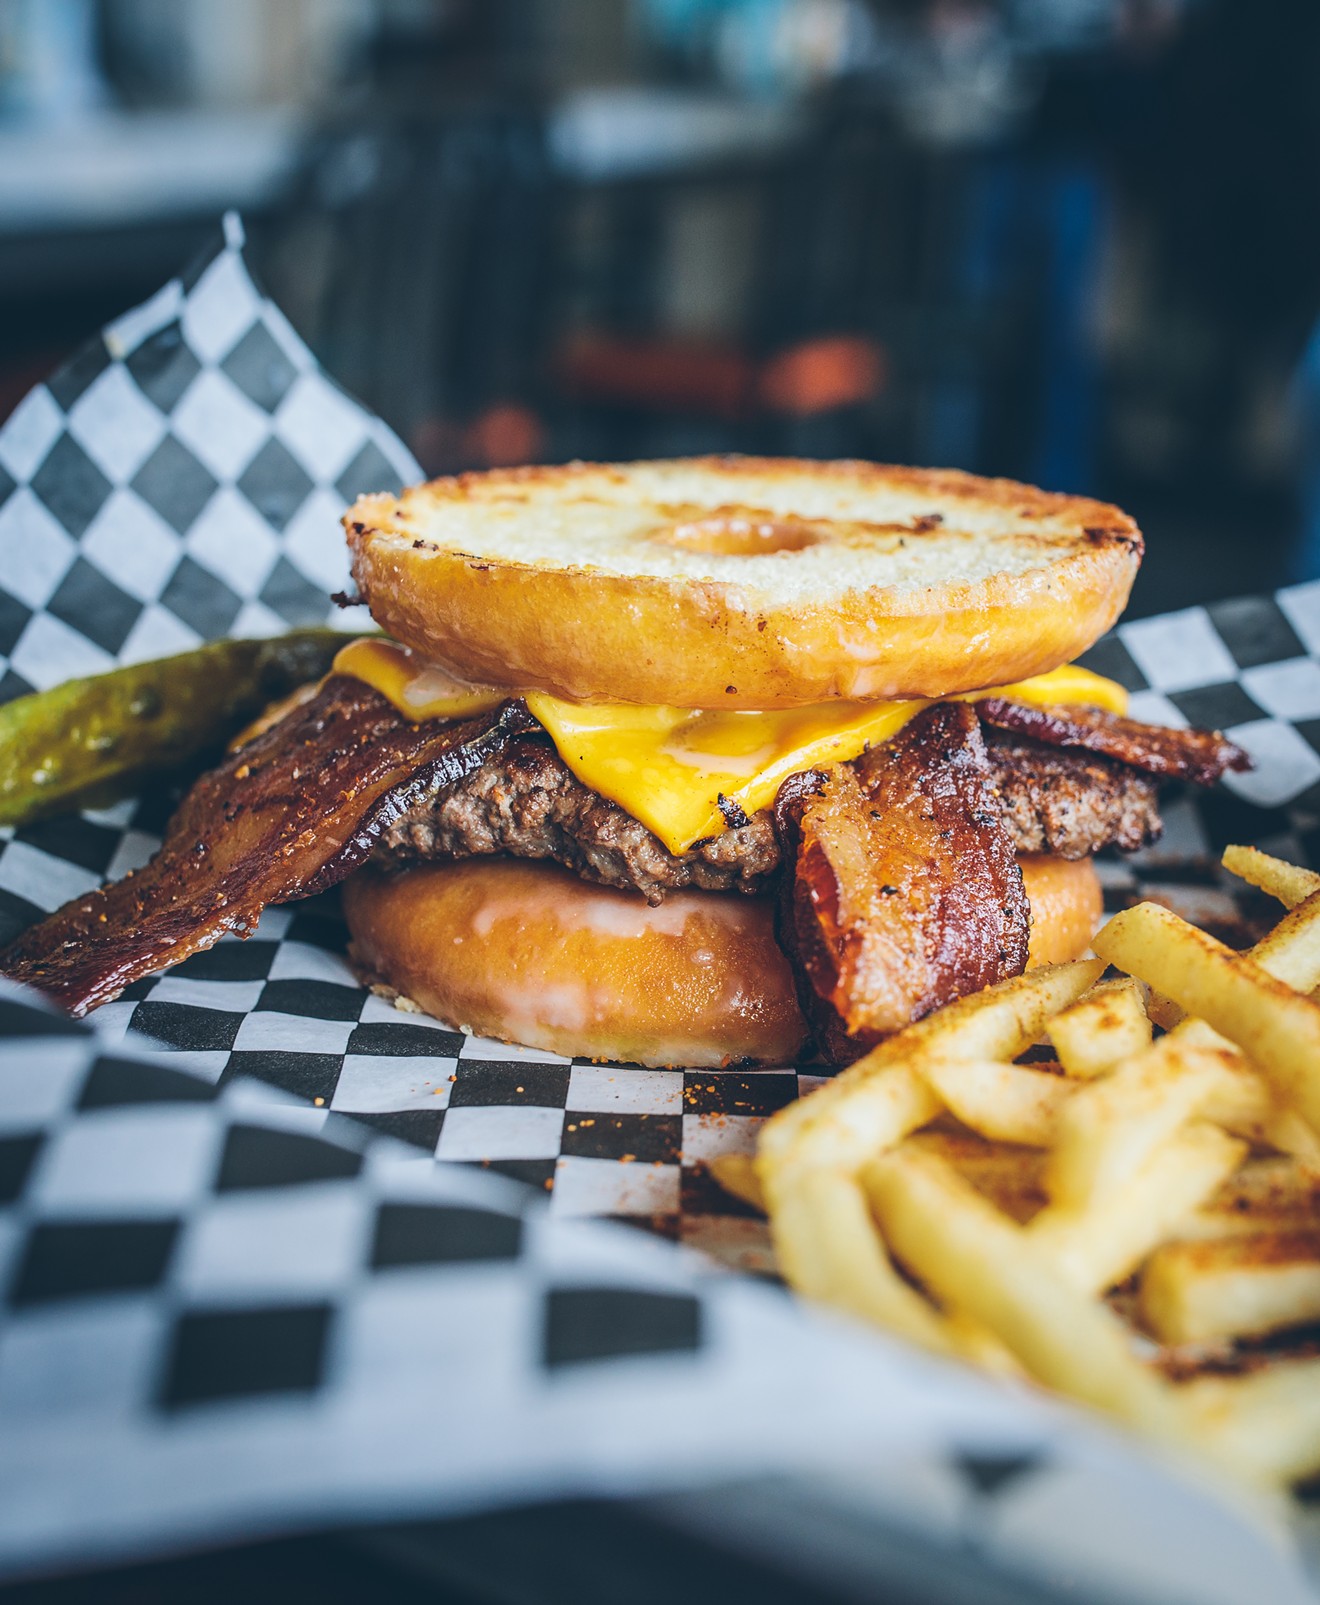 The Donut Burgers is definitely something we need more of.